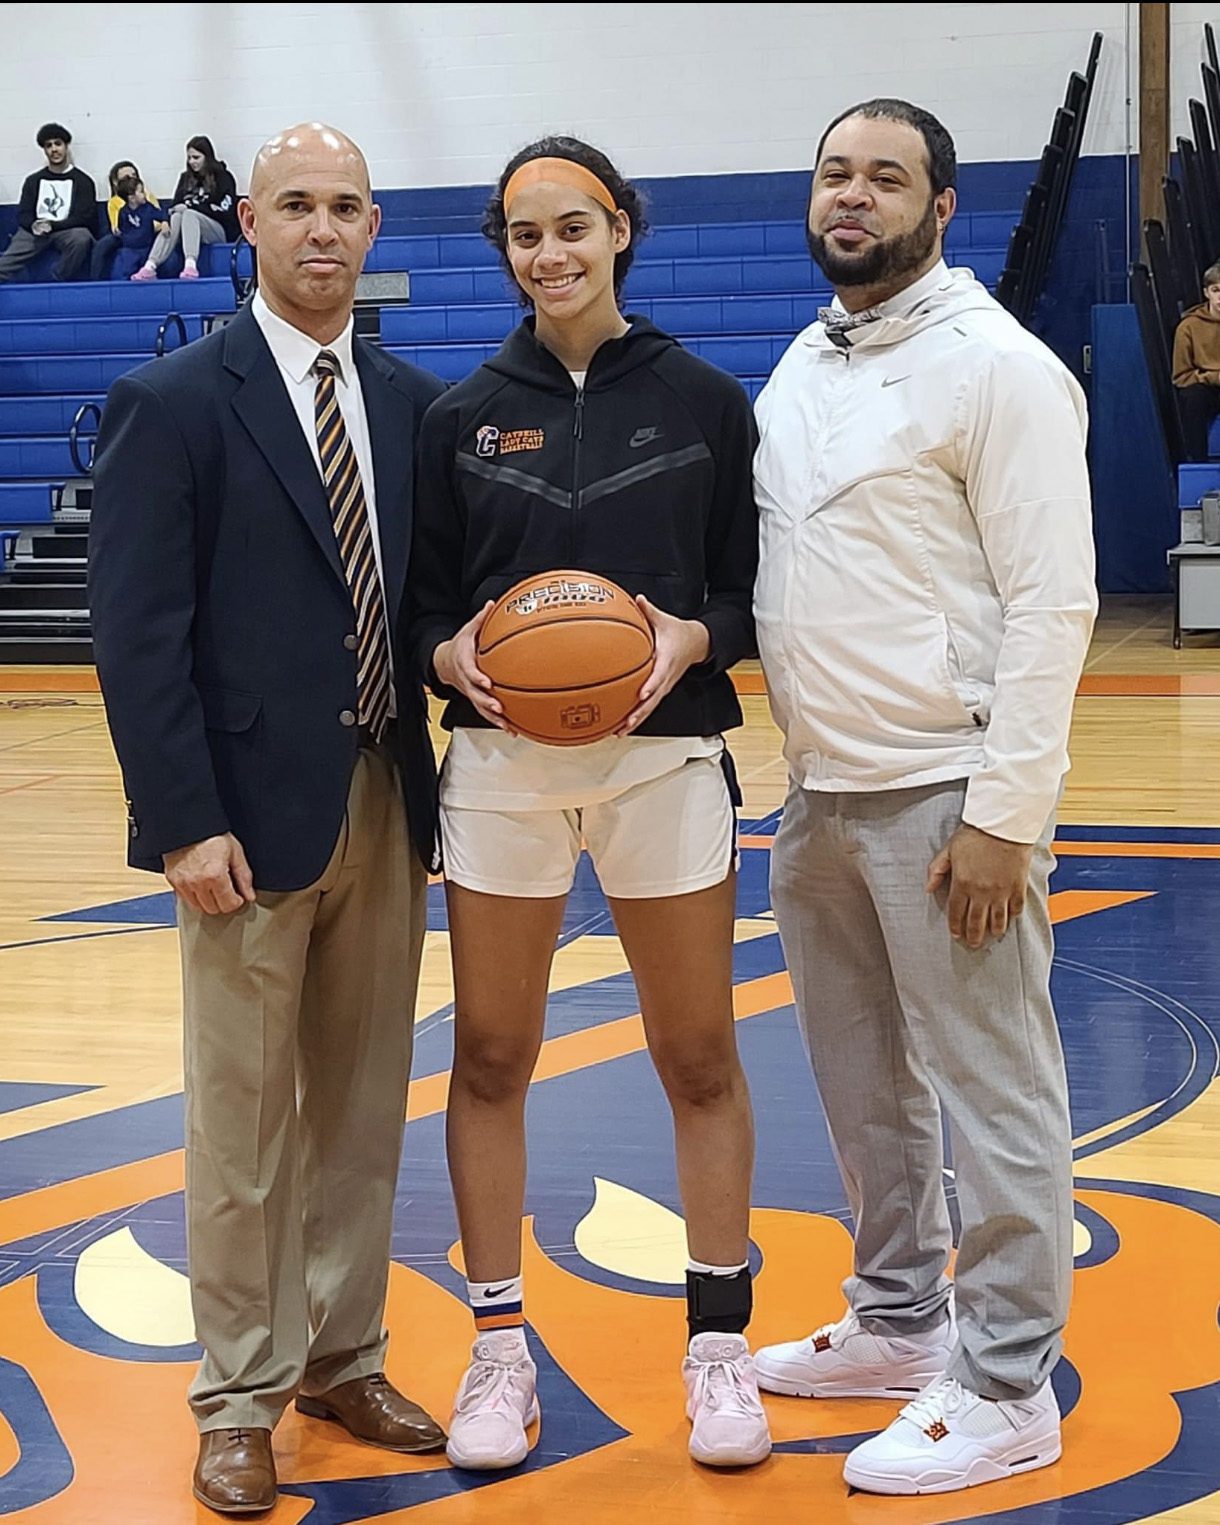 Janay Brantley holding basketball with flanked by Catskill Coaches